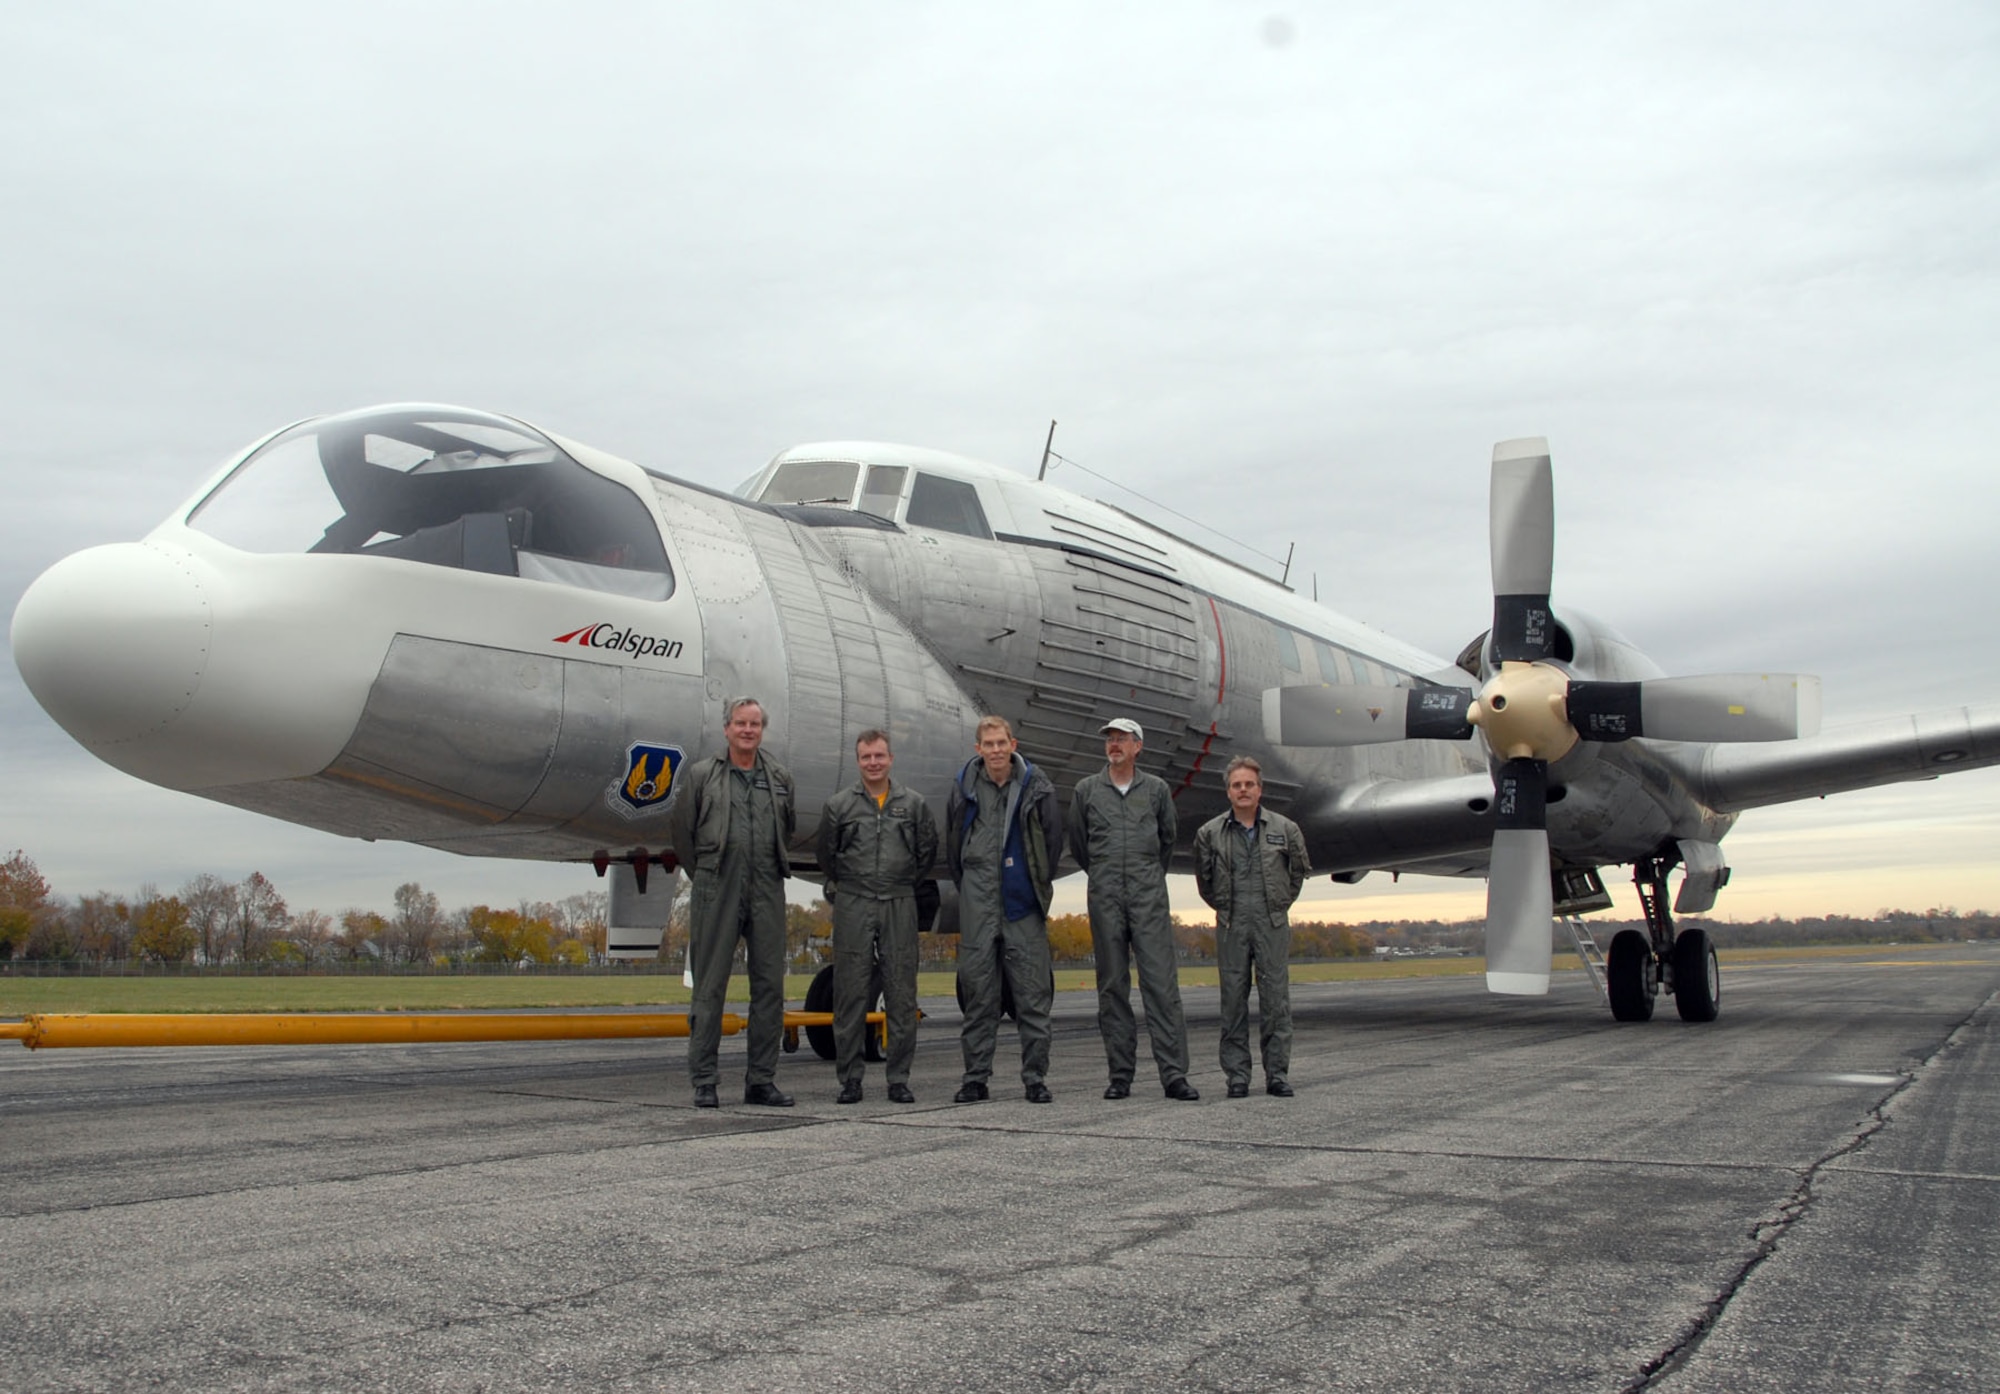 DAYTON, Ohio - The crew of the Convair NC-131H Total In-Flight Simulator (TIFS), a very unique aircraft created to perform research for the U.S. Air Force, stands in front of the aircraft just after landing at the National Museum of the U.S. Air Force on Nov. 7, 2008. (U.S. Air Force photo)